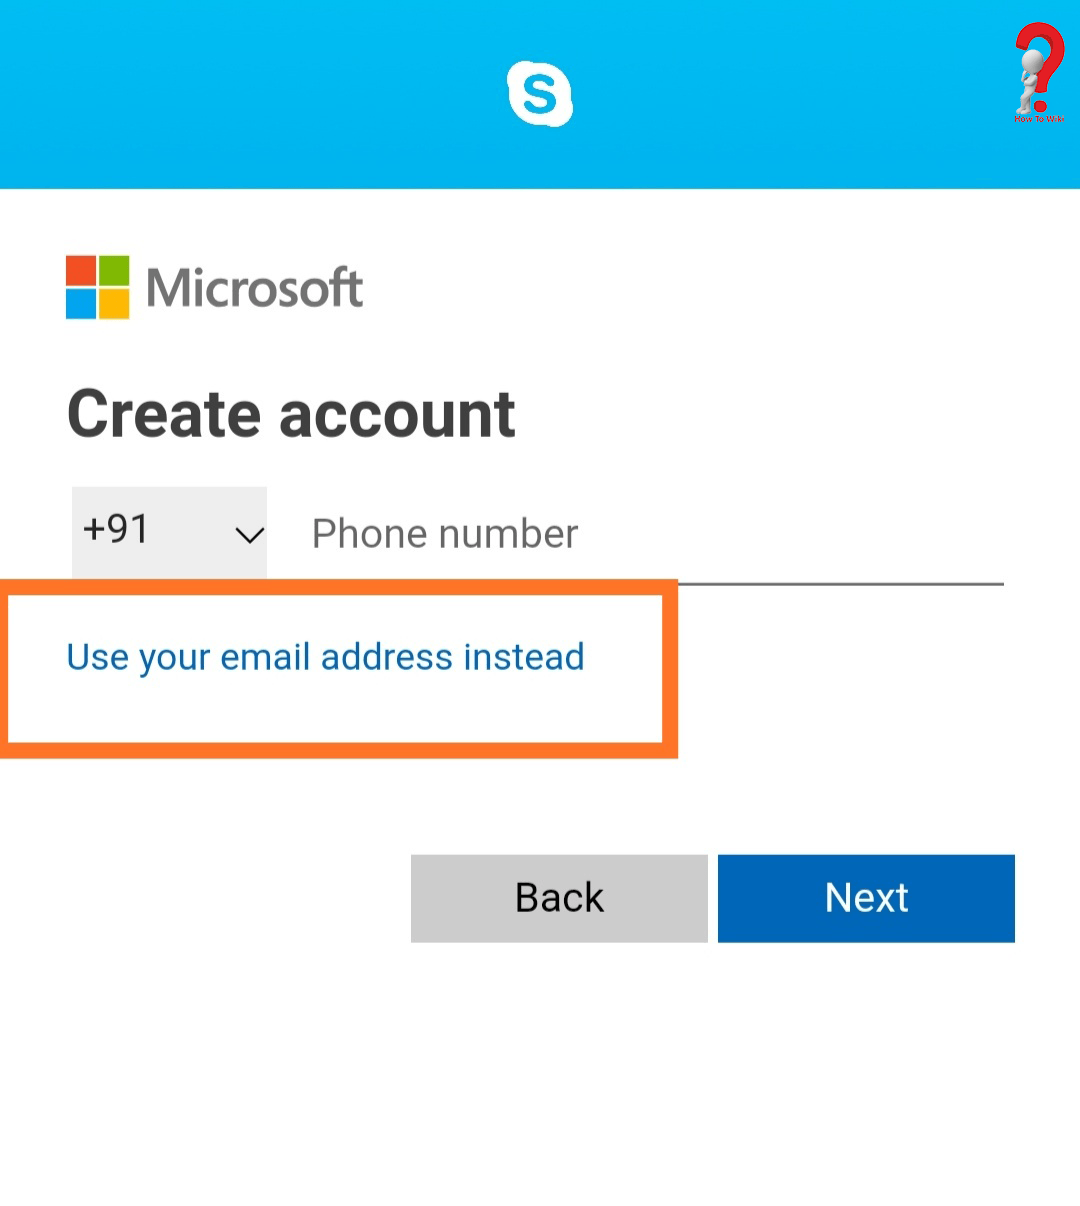 skype sign in with hotmail